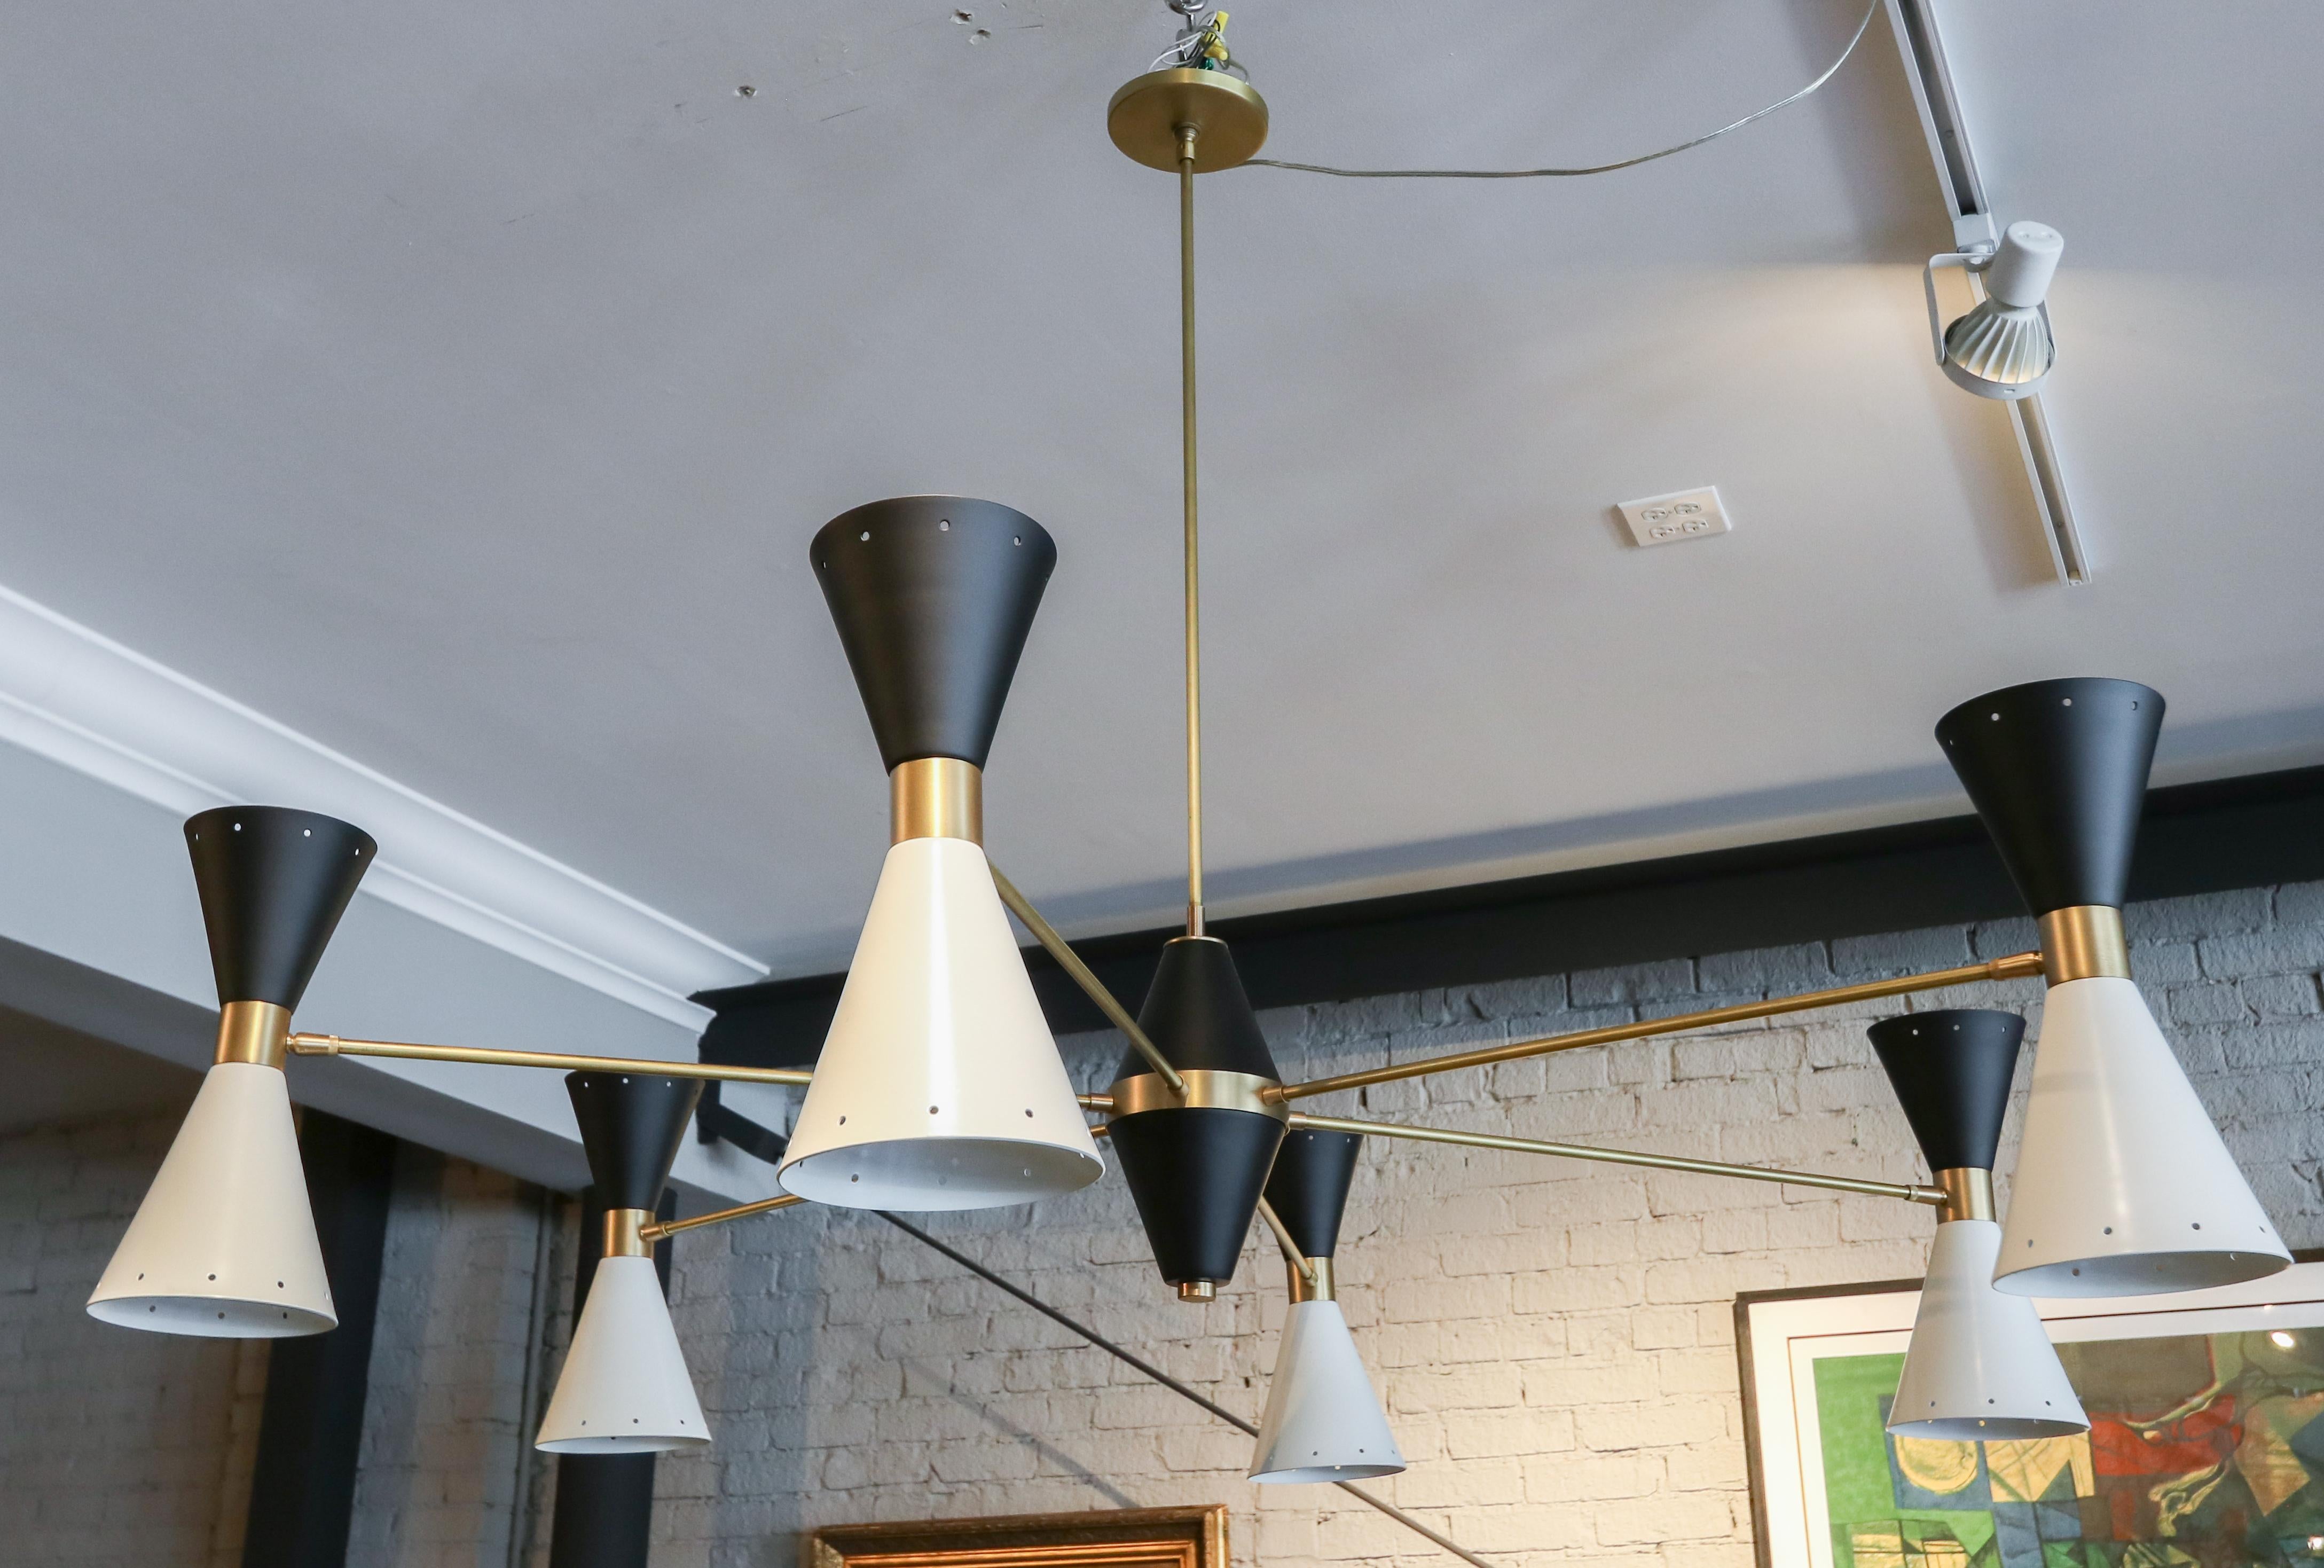 Custom midcentury style 6 arm brass chandelier with black & white metal hourglass shaped shades by Adesso Imports. Can be done in different sizes, configurations and colors.